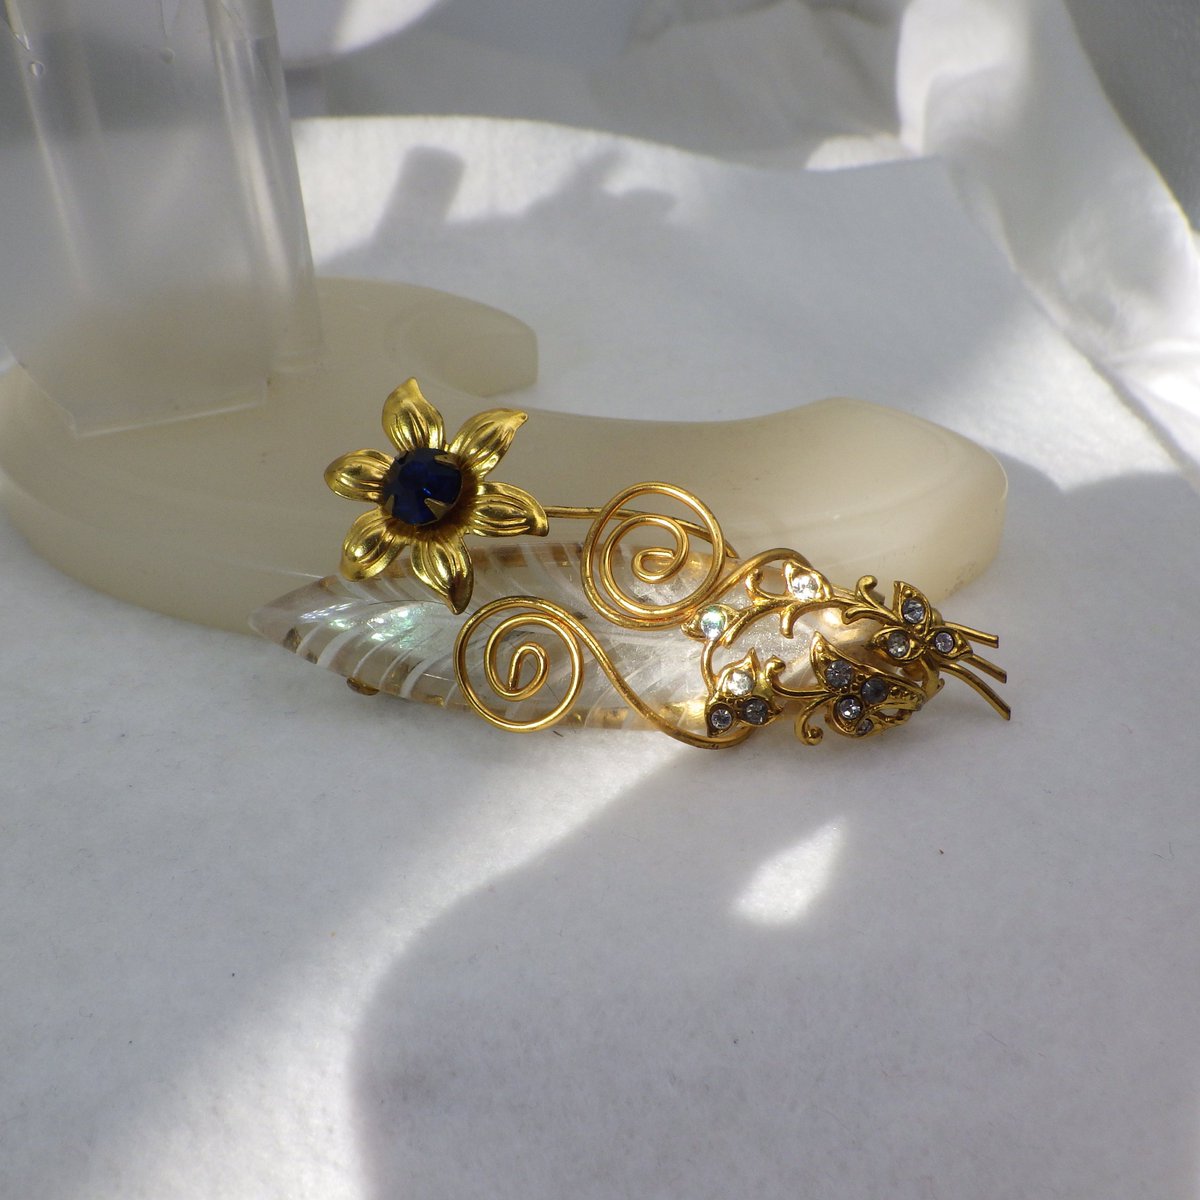 Excited to share the latest addition to my #etsyshop: #1930s #CarvedLucite #Brooch #ArtDeco Era Floral Design Vines and Flowers Sapphire Stone Goldtone Crystal Rhinestones Ladies Vintage Jewelry etsy.me/2Ov9mET #jewelry #VintageLoveByDiana